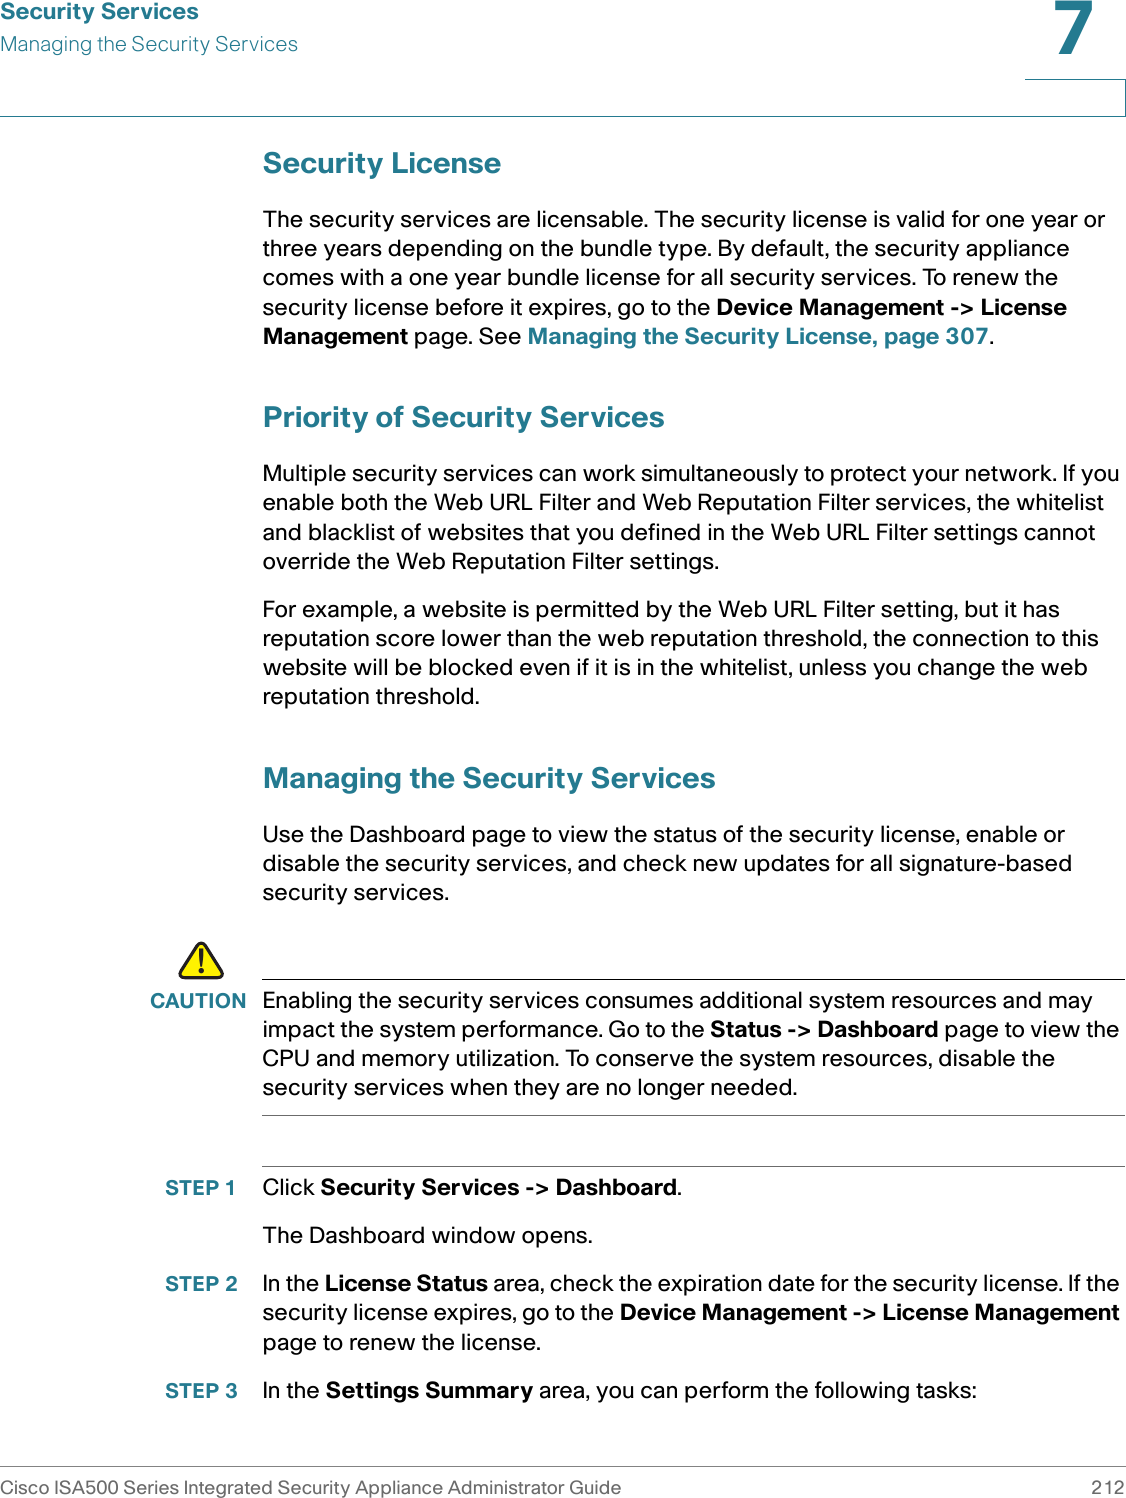 Security ServicesManaging the Security ServicesCisco ISA500 Series Integrated Security Appliance Administrator Guide 2127 Security LicenseThe security services are licensable. The security license is valid for one year or three years depending on the bundle type. By default, the security appliance comes with a one year bundle license for all security services. To renew the security license before it expires, go to the Device Management -&gt; License Management page. See Managing the Security License, page 307. Priority of Security ServicesMultiple security services can work simultaneously to protect your network. If you enable both the Web URL Filter and Web Reputation Filter services, the whitelist and blacklist of websites that you defined in the Web URL Filter settings cannot override the Web Reputation Filter settings. For example, a website is permitted by the Web URL Filter setting, but it has reputation score lower than the web reputation threshold, the connection to this website will be blocked even if it is in the whitelist, unless you change the web reputation threshold. Managing the Security ServicesUse the Dashboard page to view the status of the security license, enable or disable the security services, and check new updates for all signature-based security services. !CAUTION Enabling the security services consumes additional system resources and may impact the system performance. Go to the Status -&gt; Dashboard page to view the CPU and memory utilization. To conserve the system resources, disable the security services when they are no longer needed.STEP 1 Click Security Services -&gt; Dashboard. The Dashboard window opens. STEP 2 In the License Status area, check the expiration date for the security license. If the security license expires, go to the Device Management -&gt; License Management page to renew the license. STEP 3 In the Settings Summary area, you can perform the following tasks: 